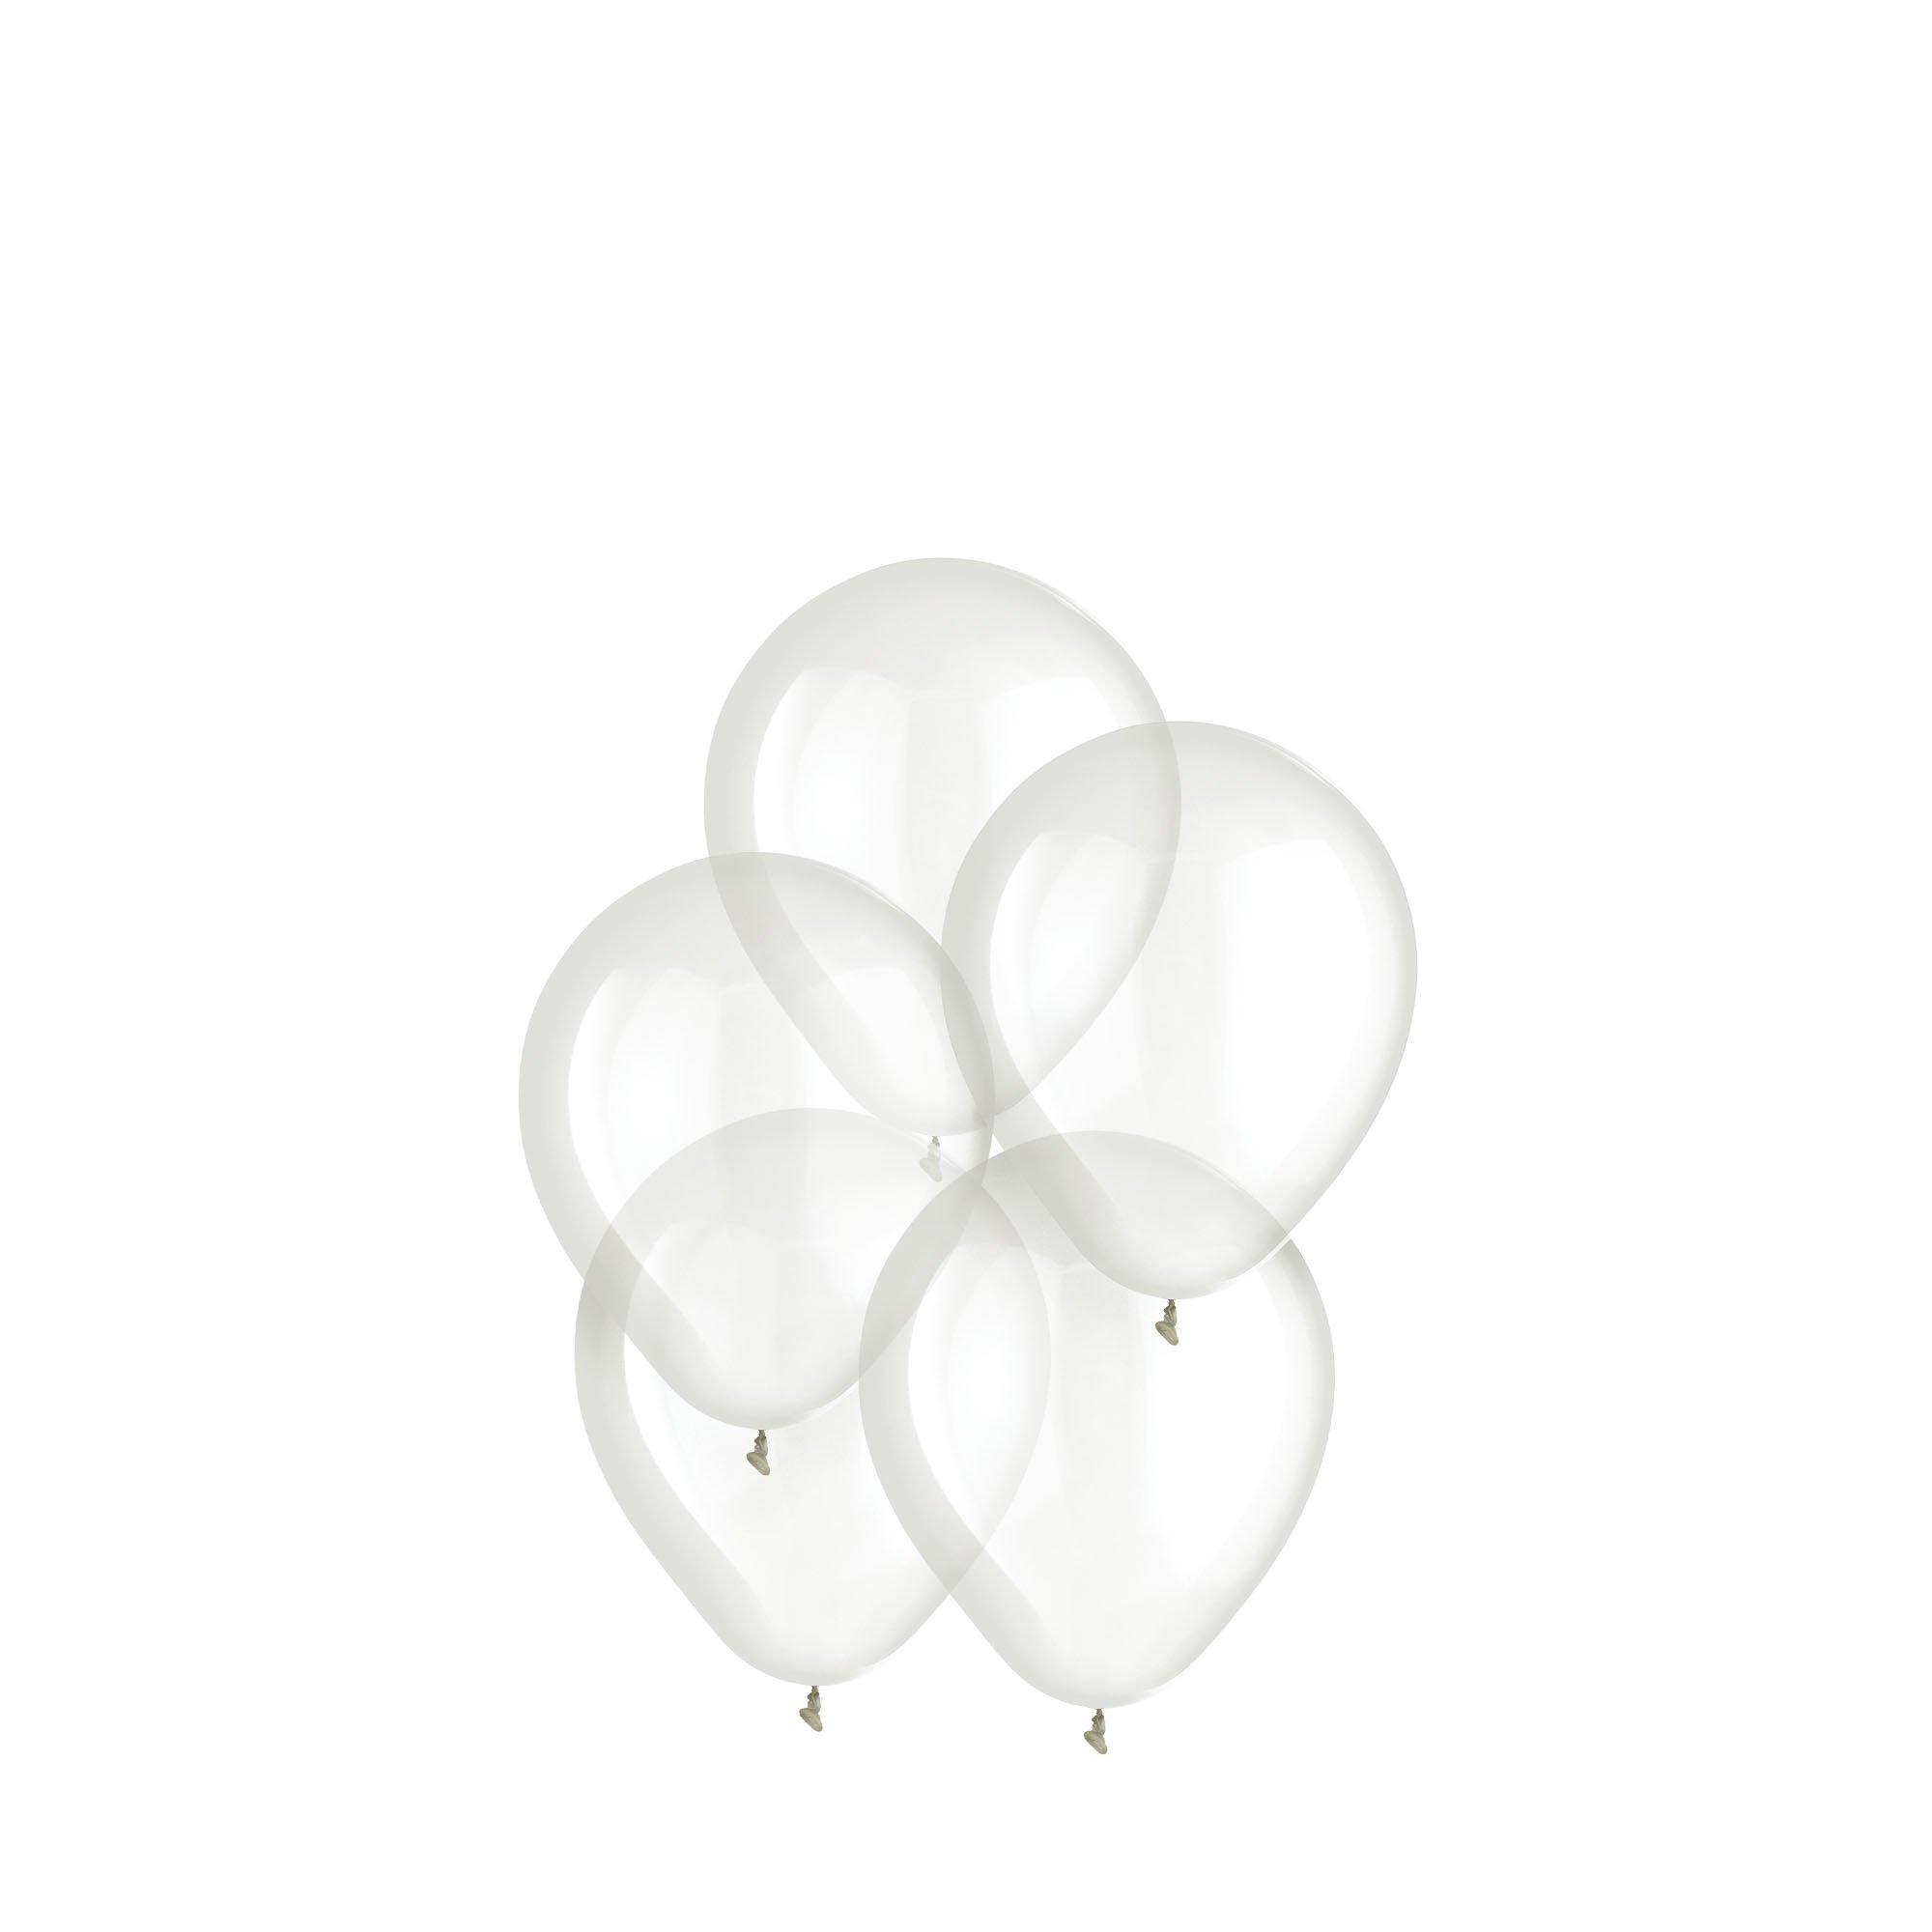 Casewin Mini Clear Balloons for Stuffing, 100 Pcs 5 Inch Round